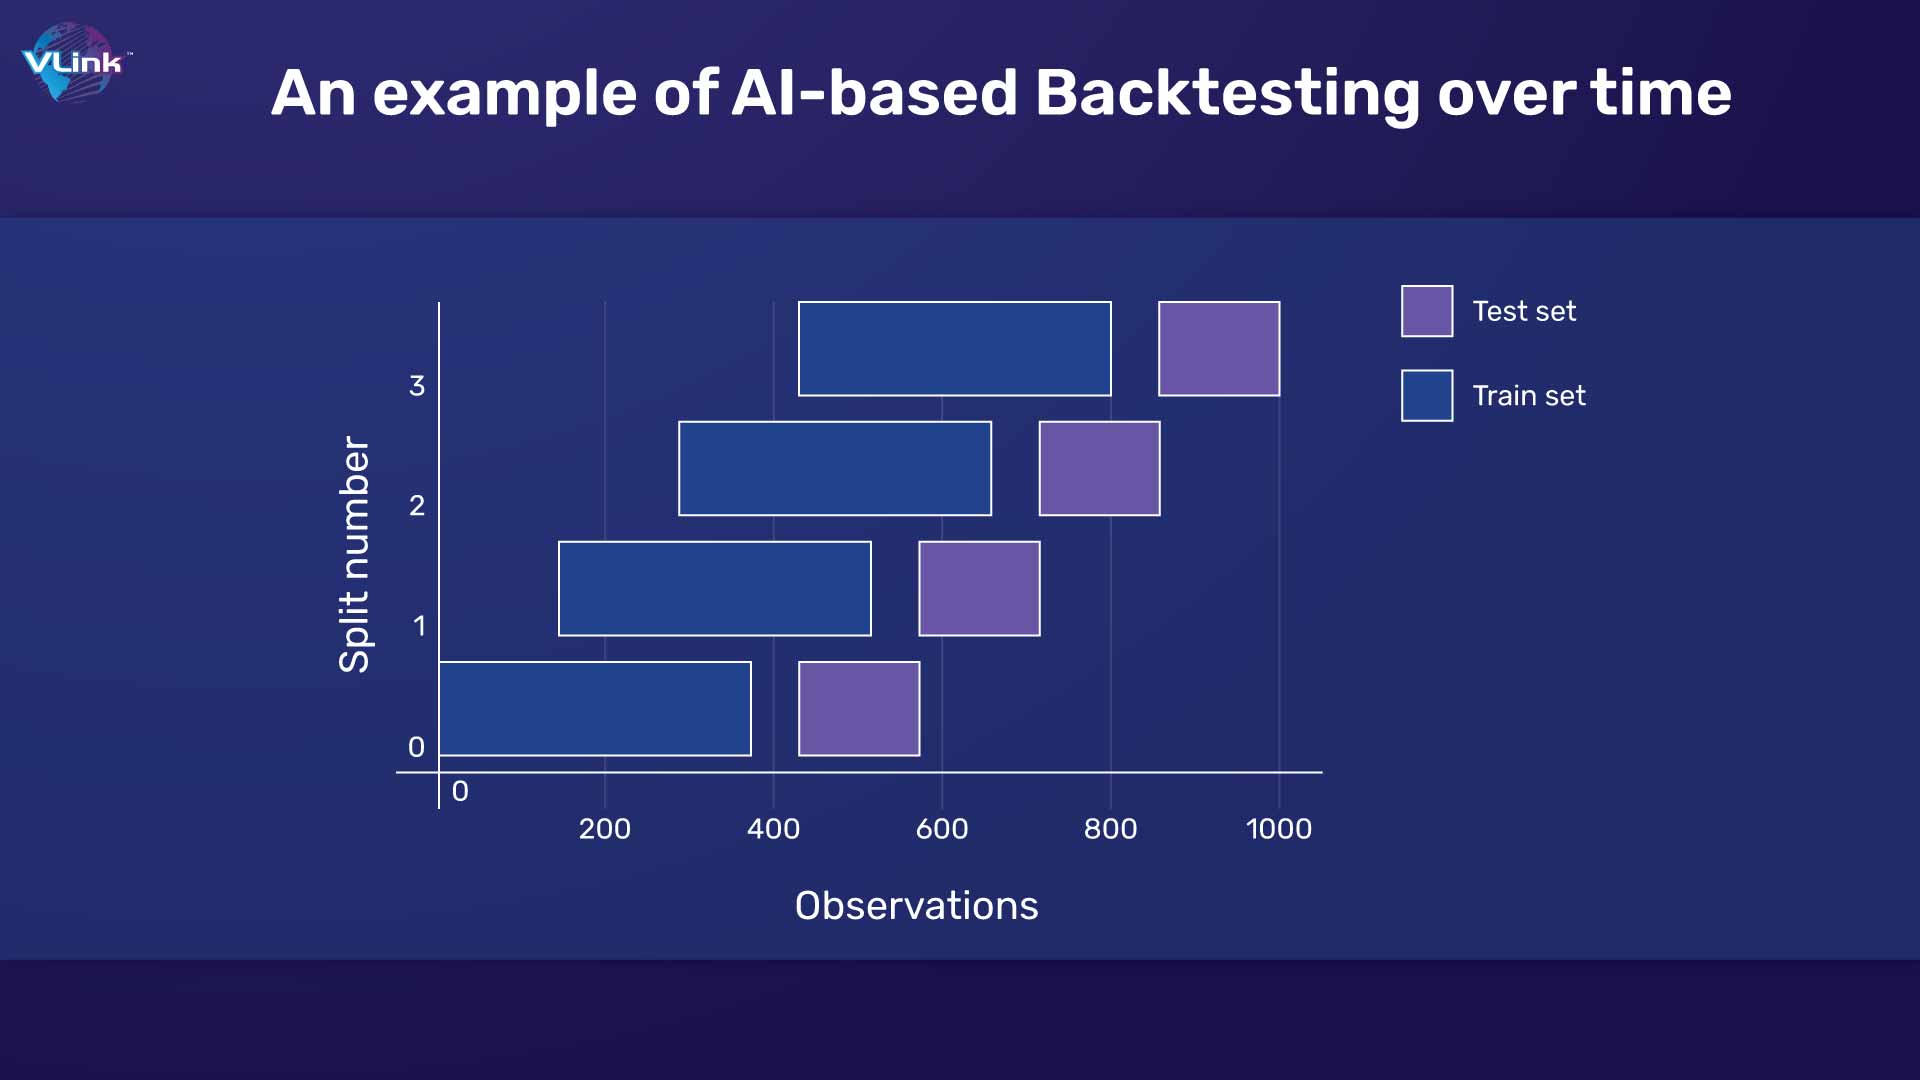 An example of AI-based Backtesting over time